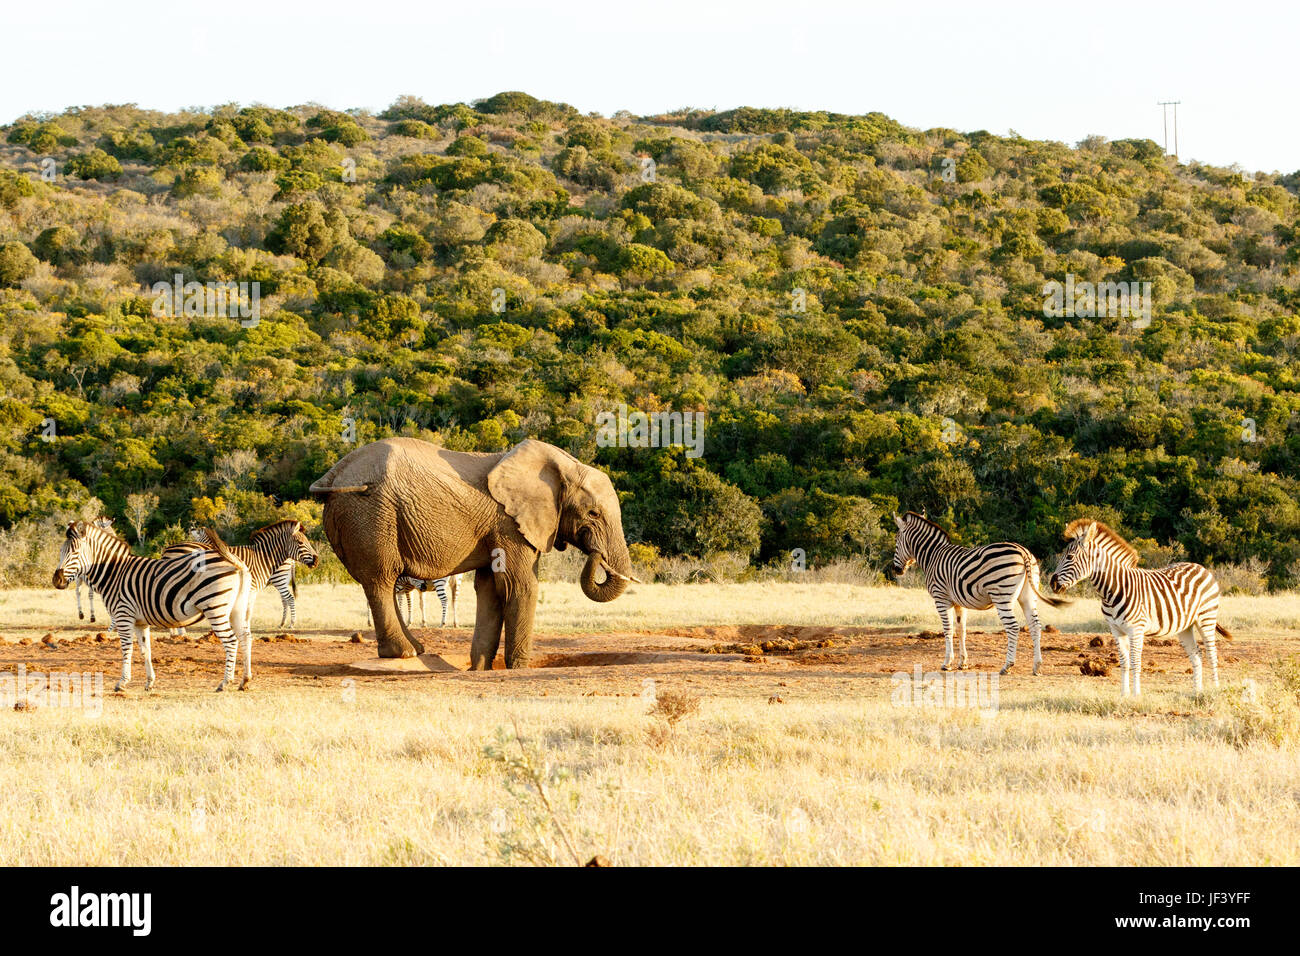 The Elephant and Zebra tail fight Stock Photo